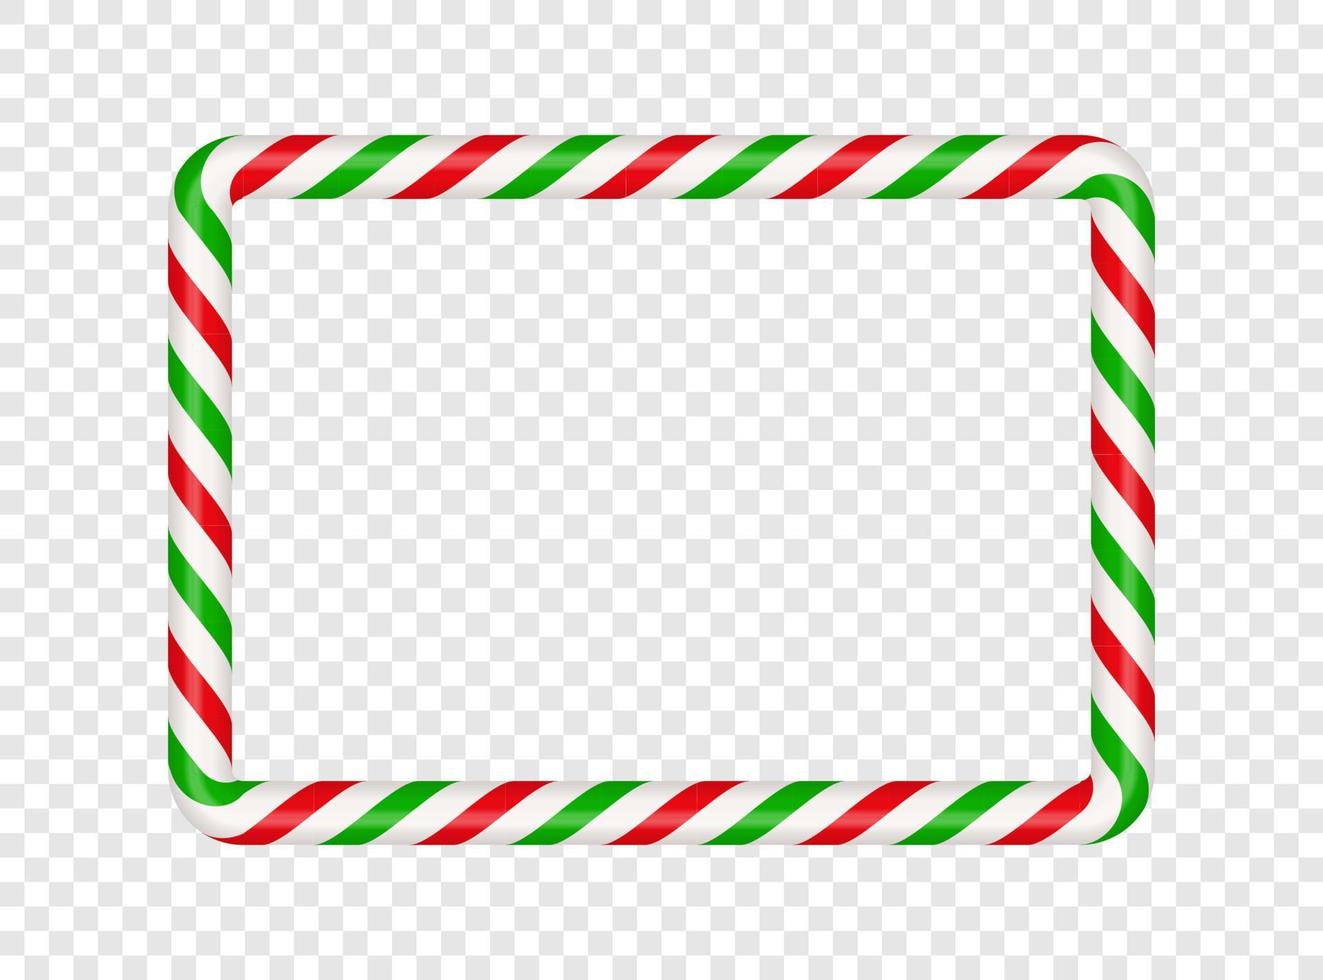 Christmas candy cane rectangle frame with red and green stripe. Xmas border with striped candy lollipop pattern. Blank christmas template. Vector illustration isolated on transparent background